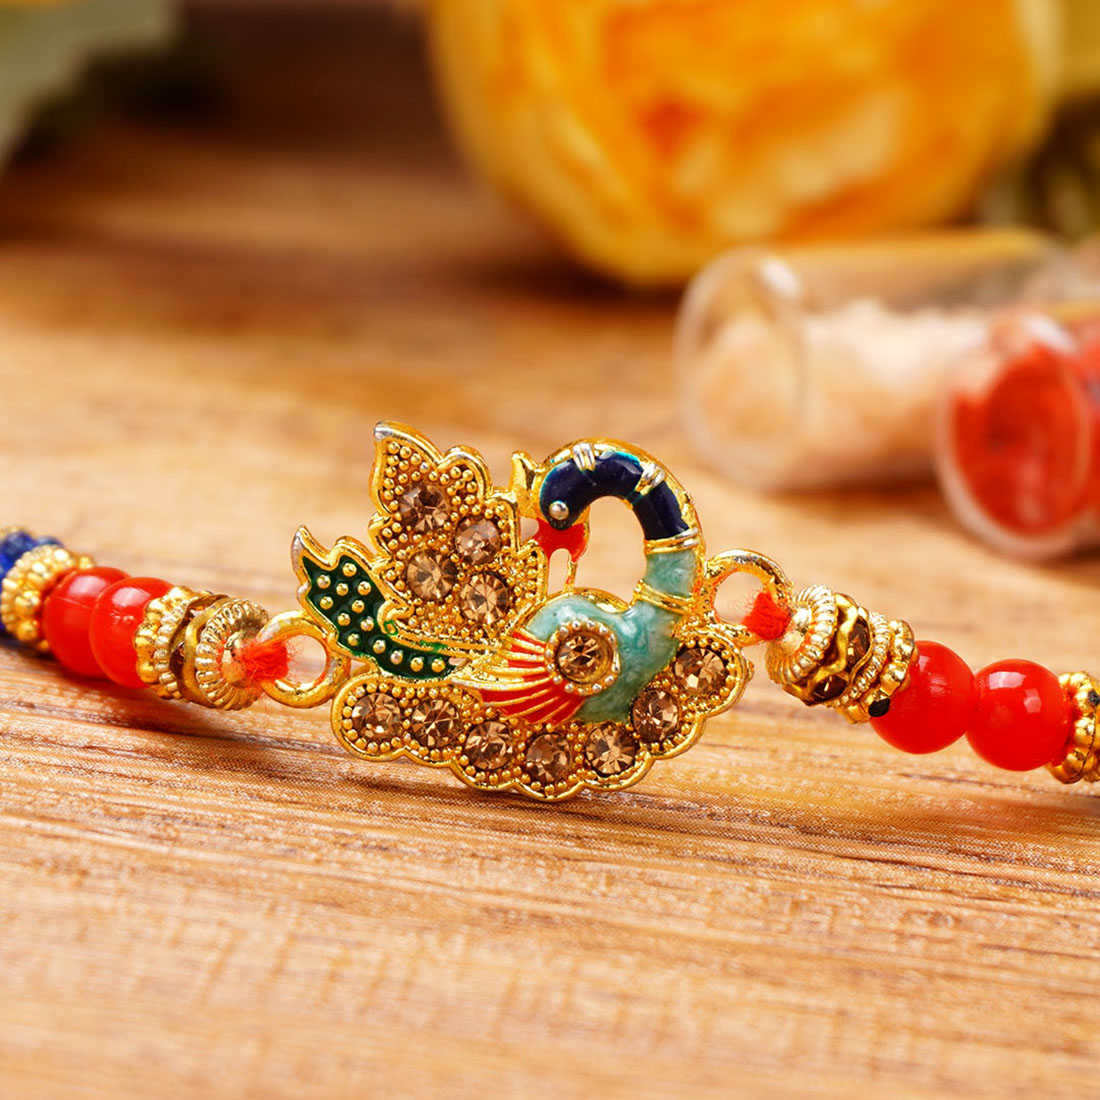 Urmika Colorful Peacock Rakhi with Red Thread with Roli Chawal